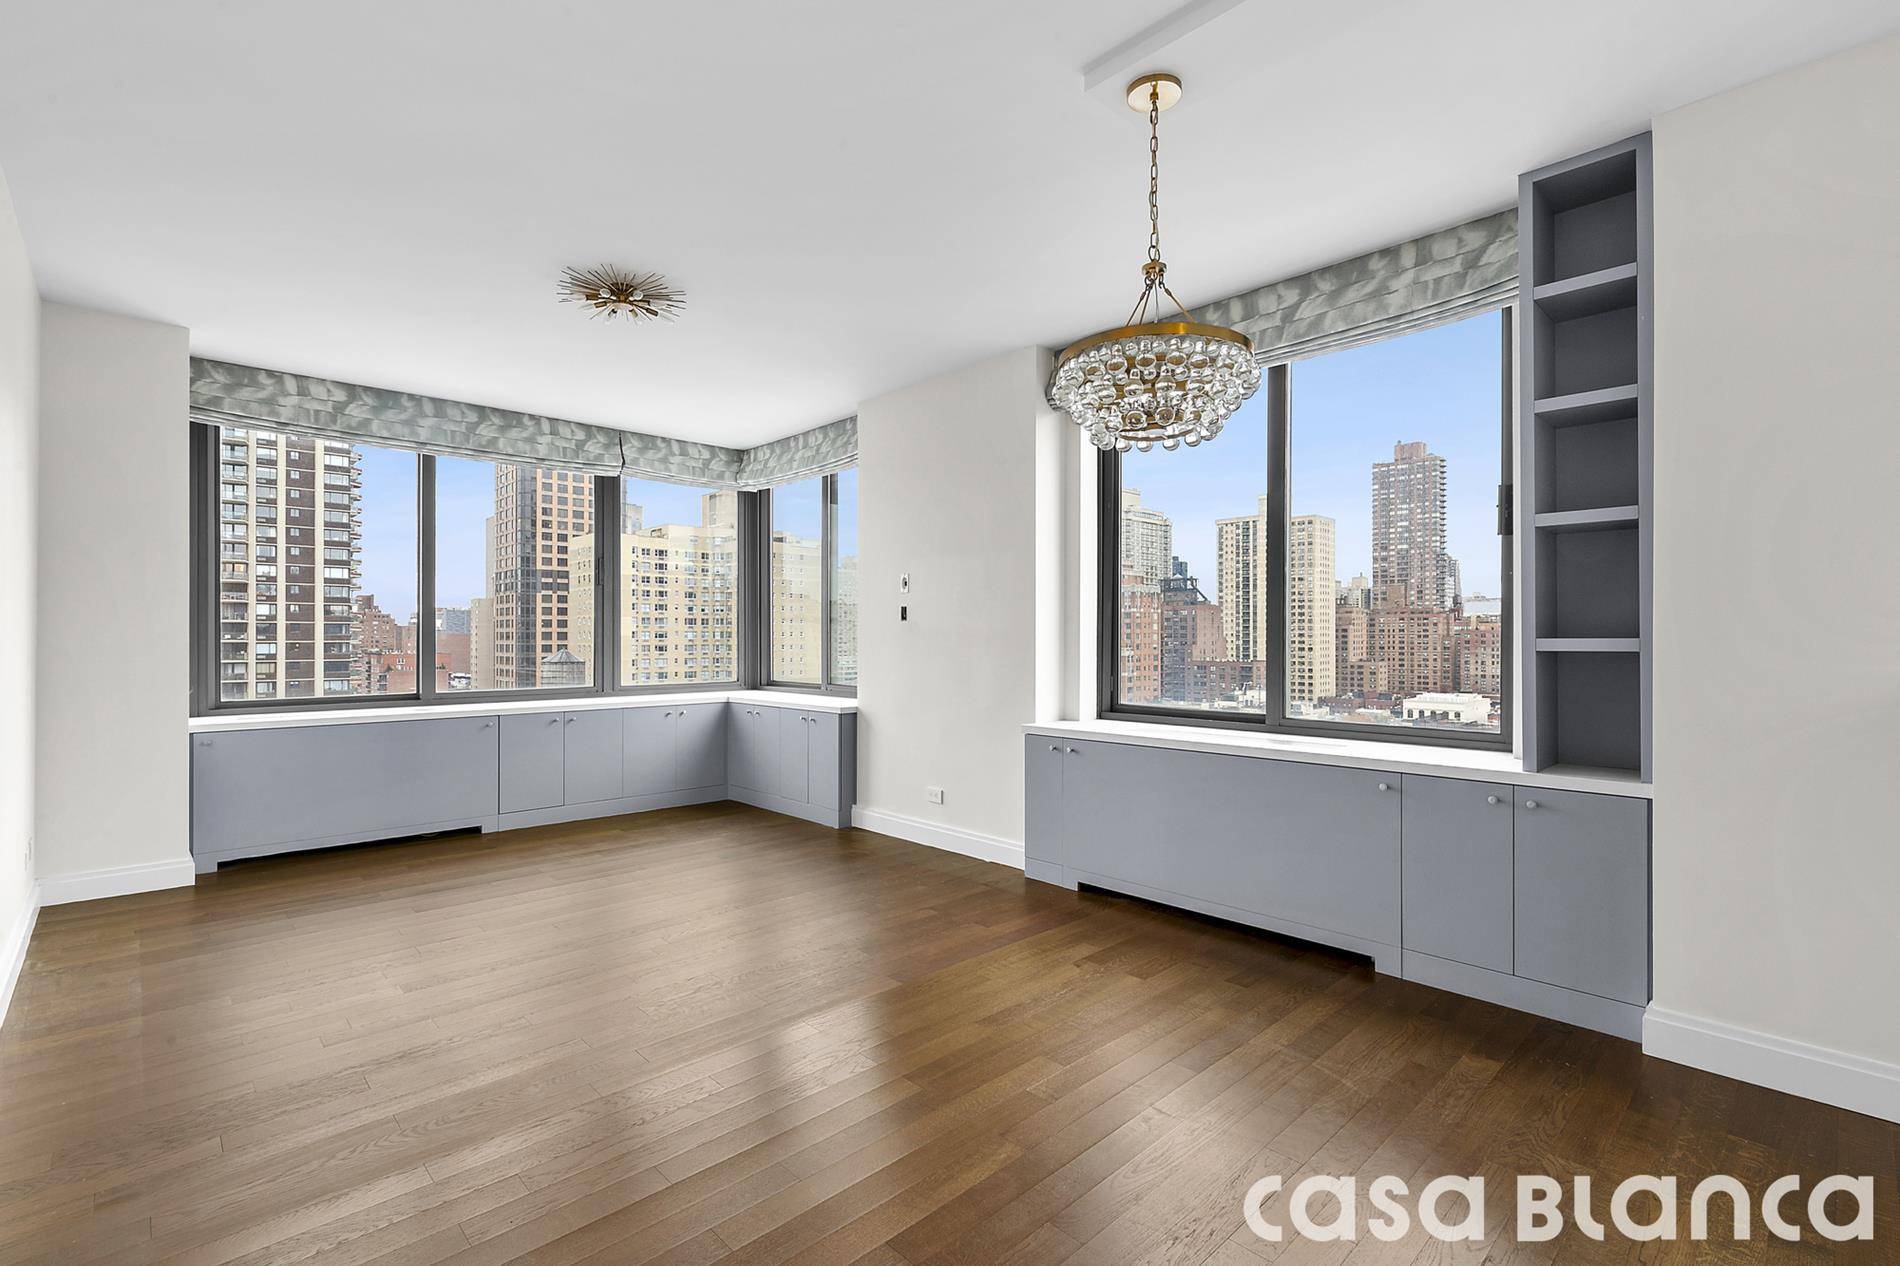 Welcome to this stunning corner unit located at 300 East 85th St Unit 1401, New York, NY 10028.